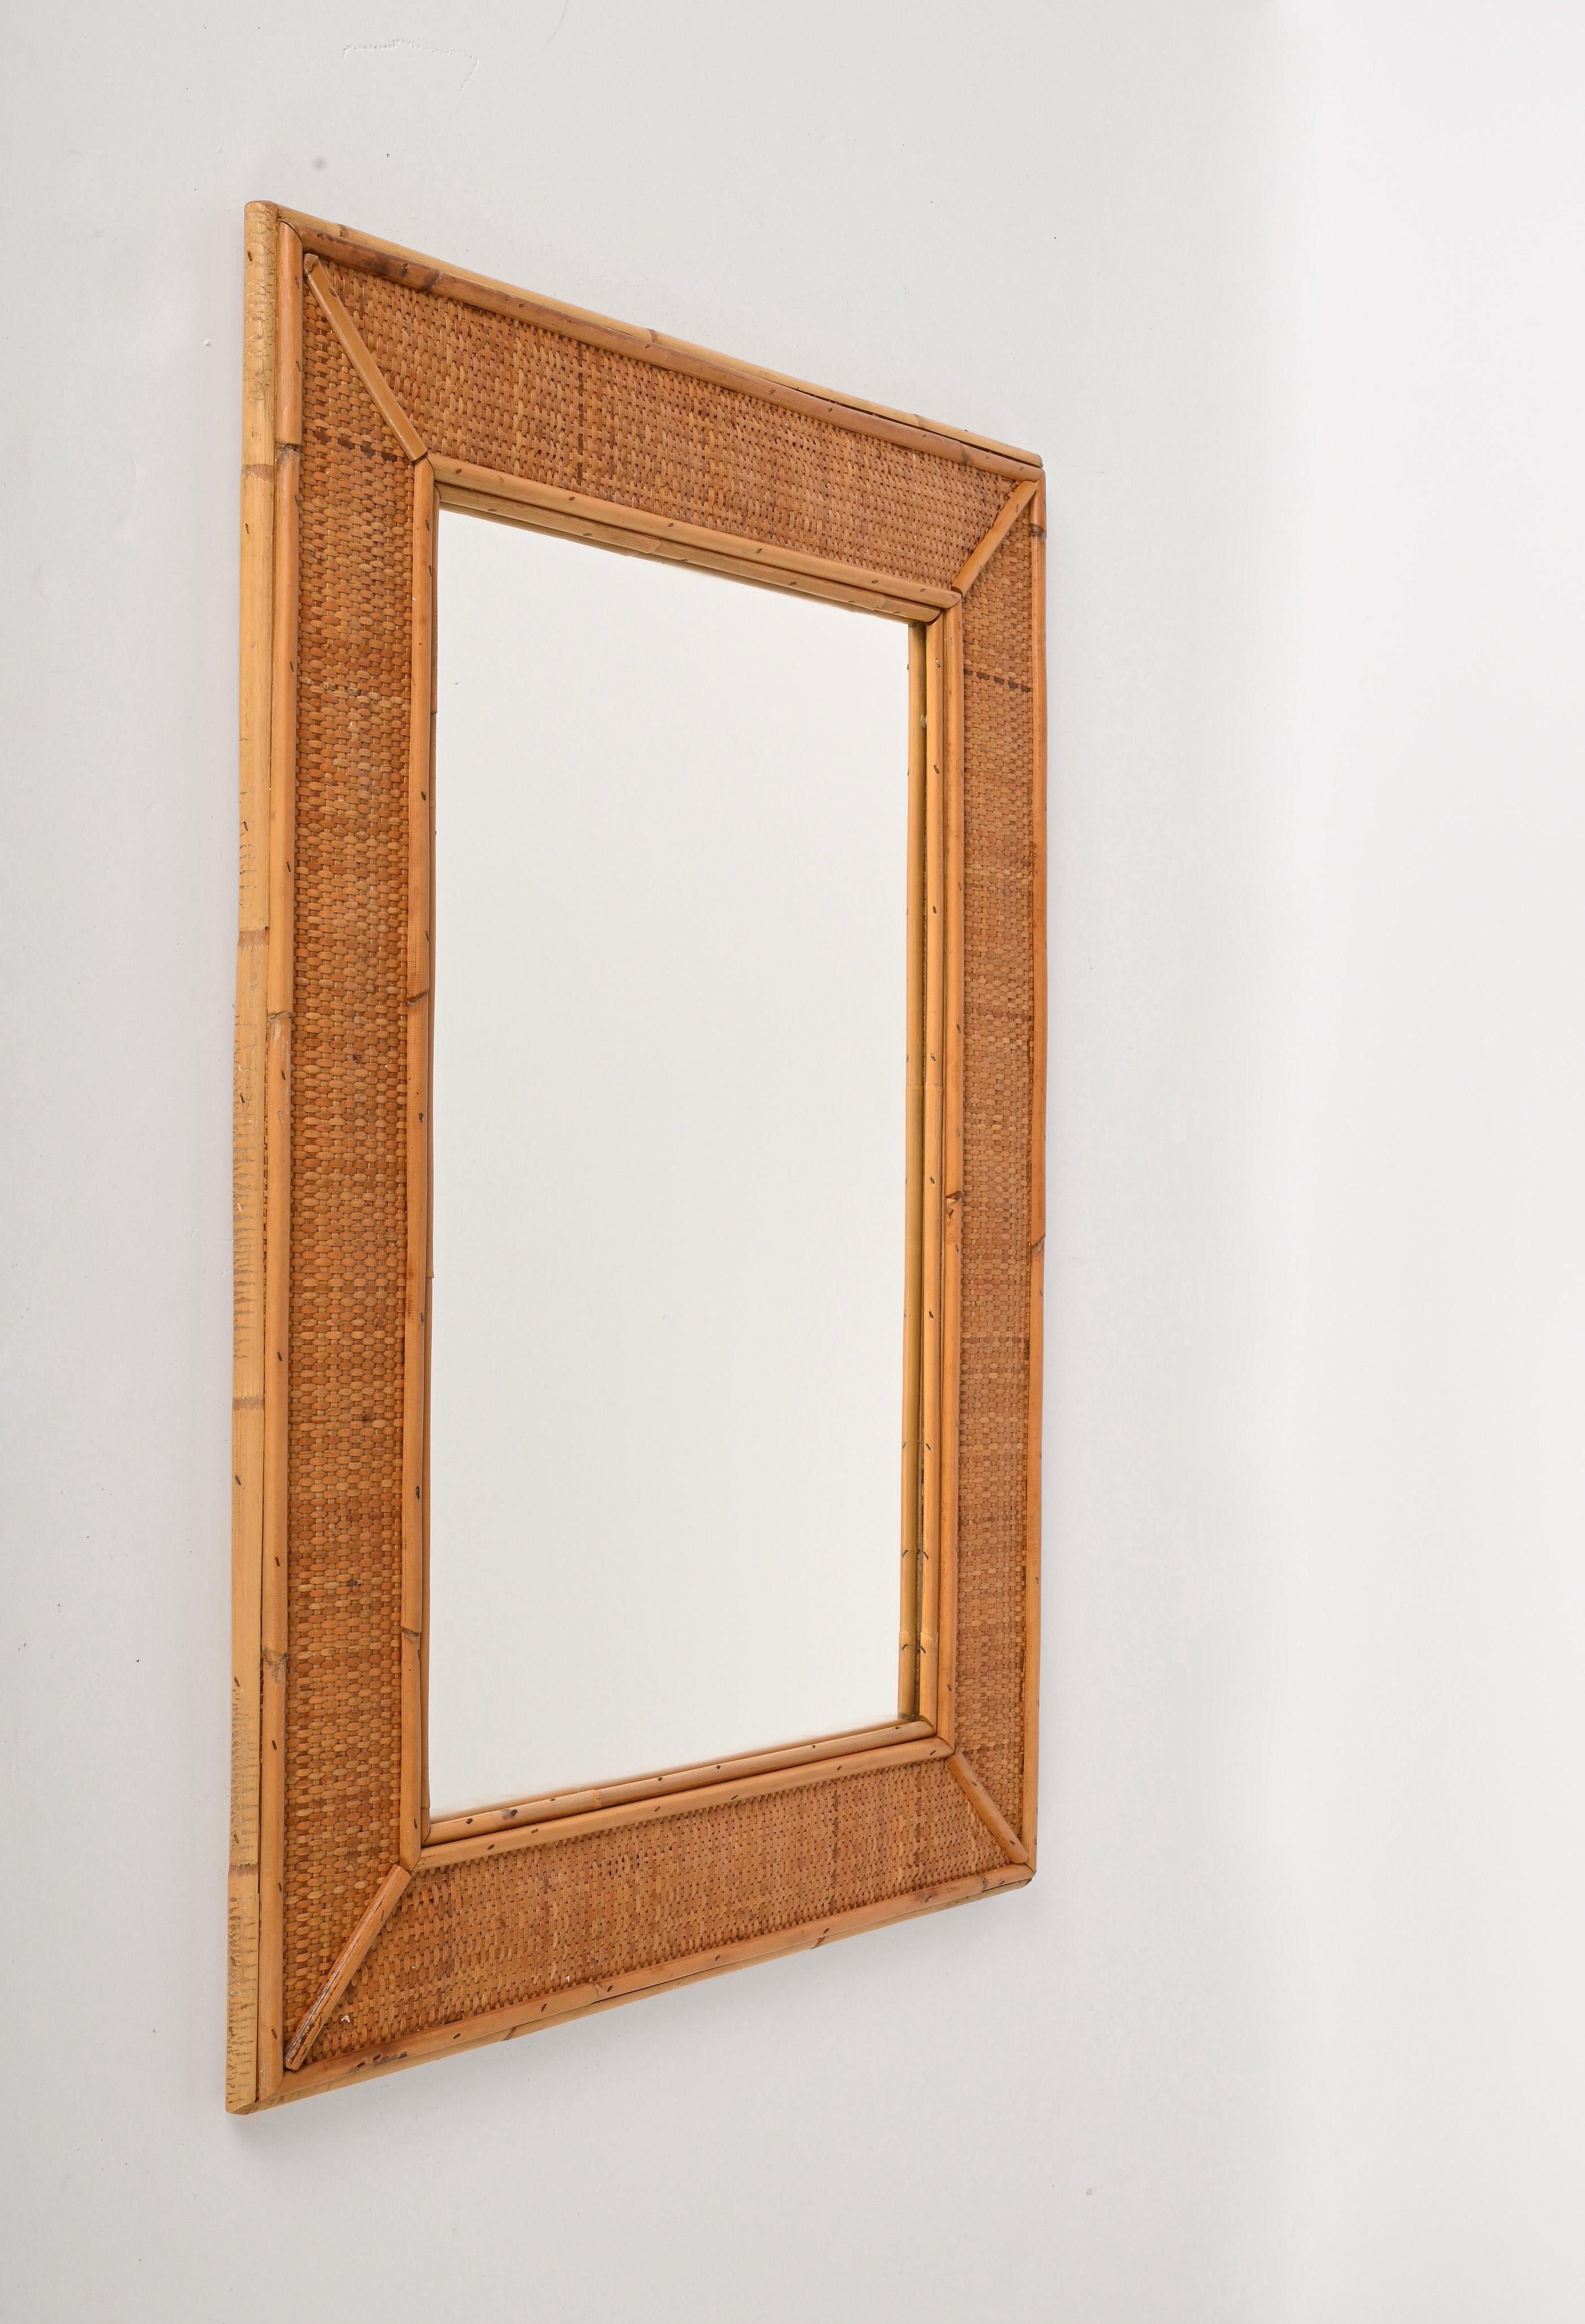 Midcentury Rectangular Italian Mirror with Bamboo and Woven Wicker Frame, 1970s In Good Condition For Sale In Roma, IT